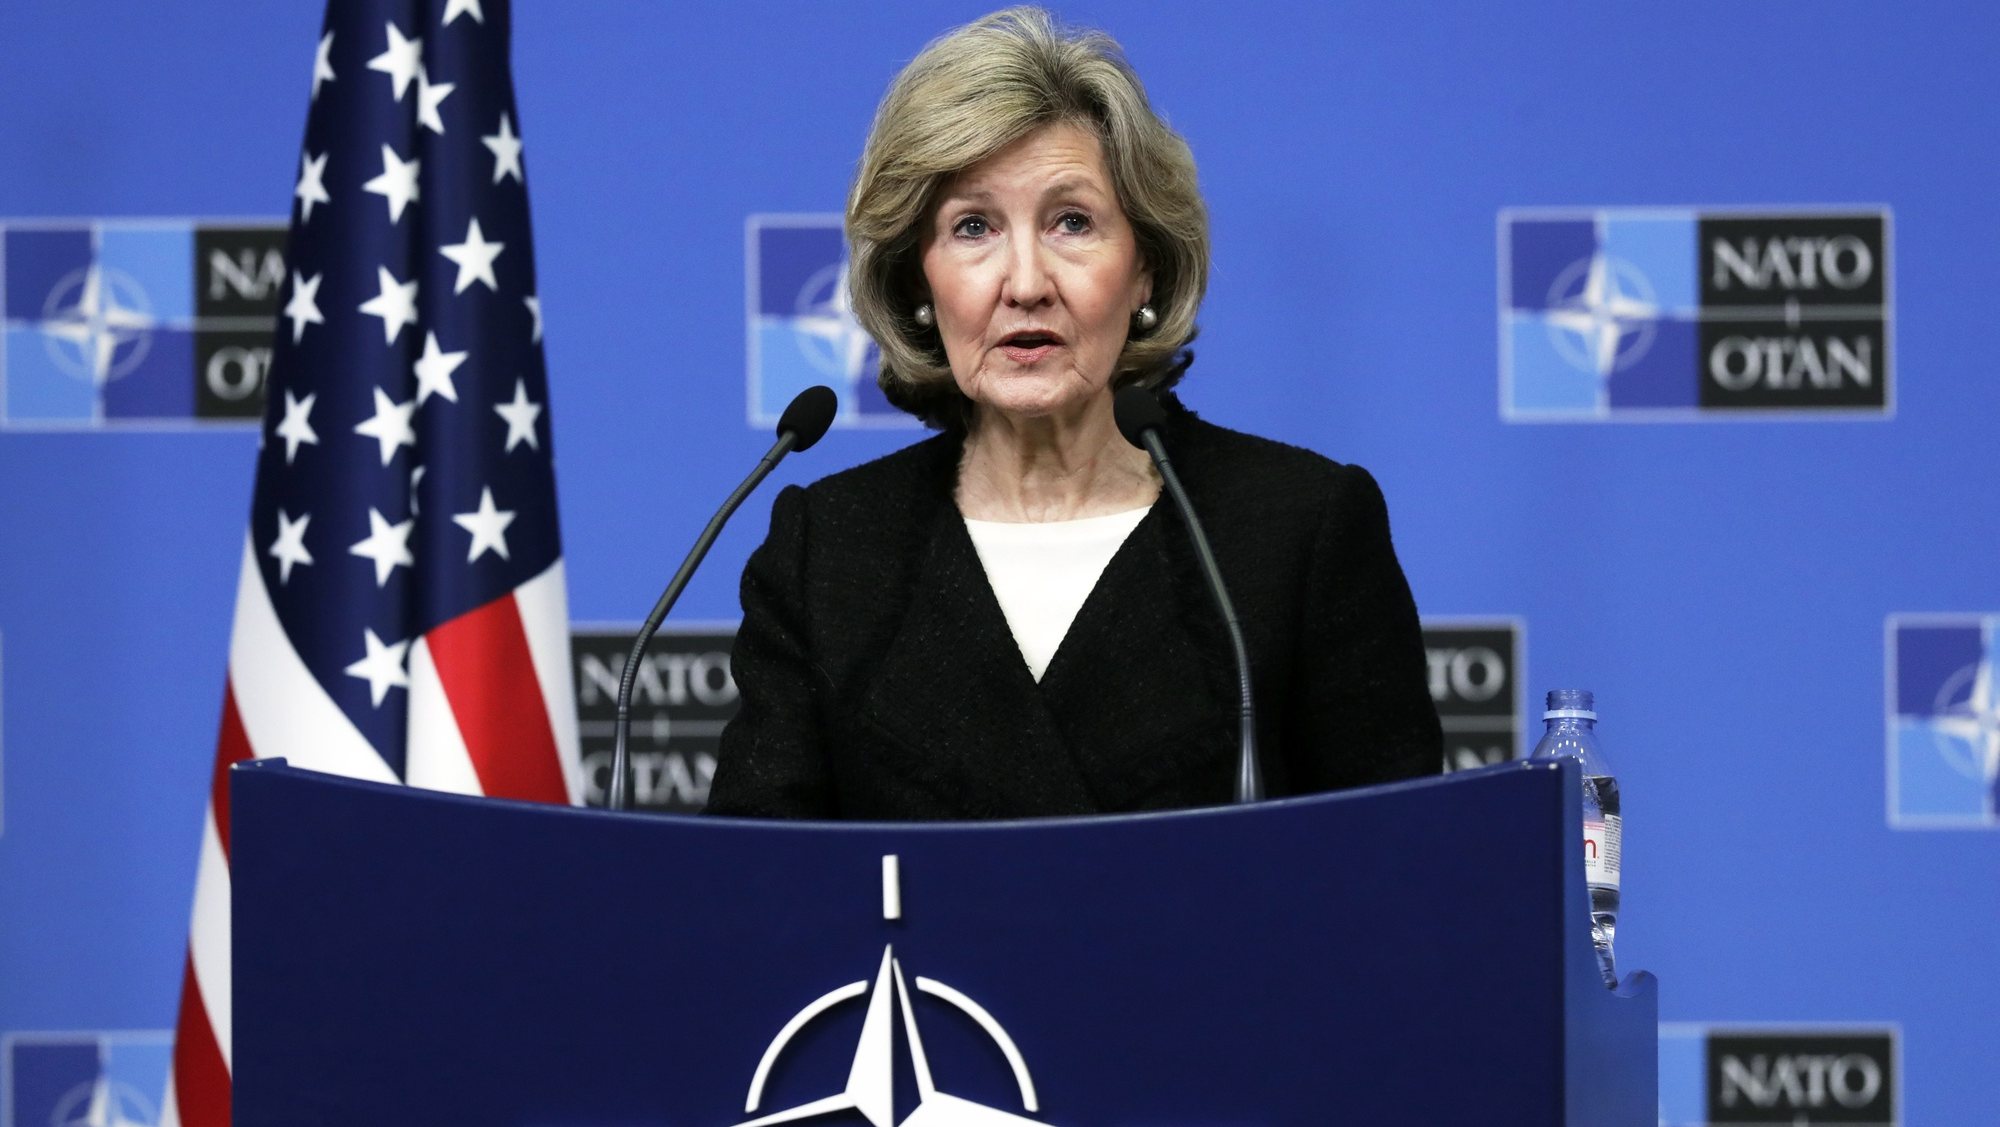 epa08210739 US Ambassador to NATO Kay Bailey Hutchison speaks at a press conference ahead to a NATO defense ministers meeting in Brussels, Belgium, 11 February 2020. Nato defense minister will gather on 12 and 13 February in Brussels.  EPA/OLIVIER HOSLET